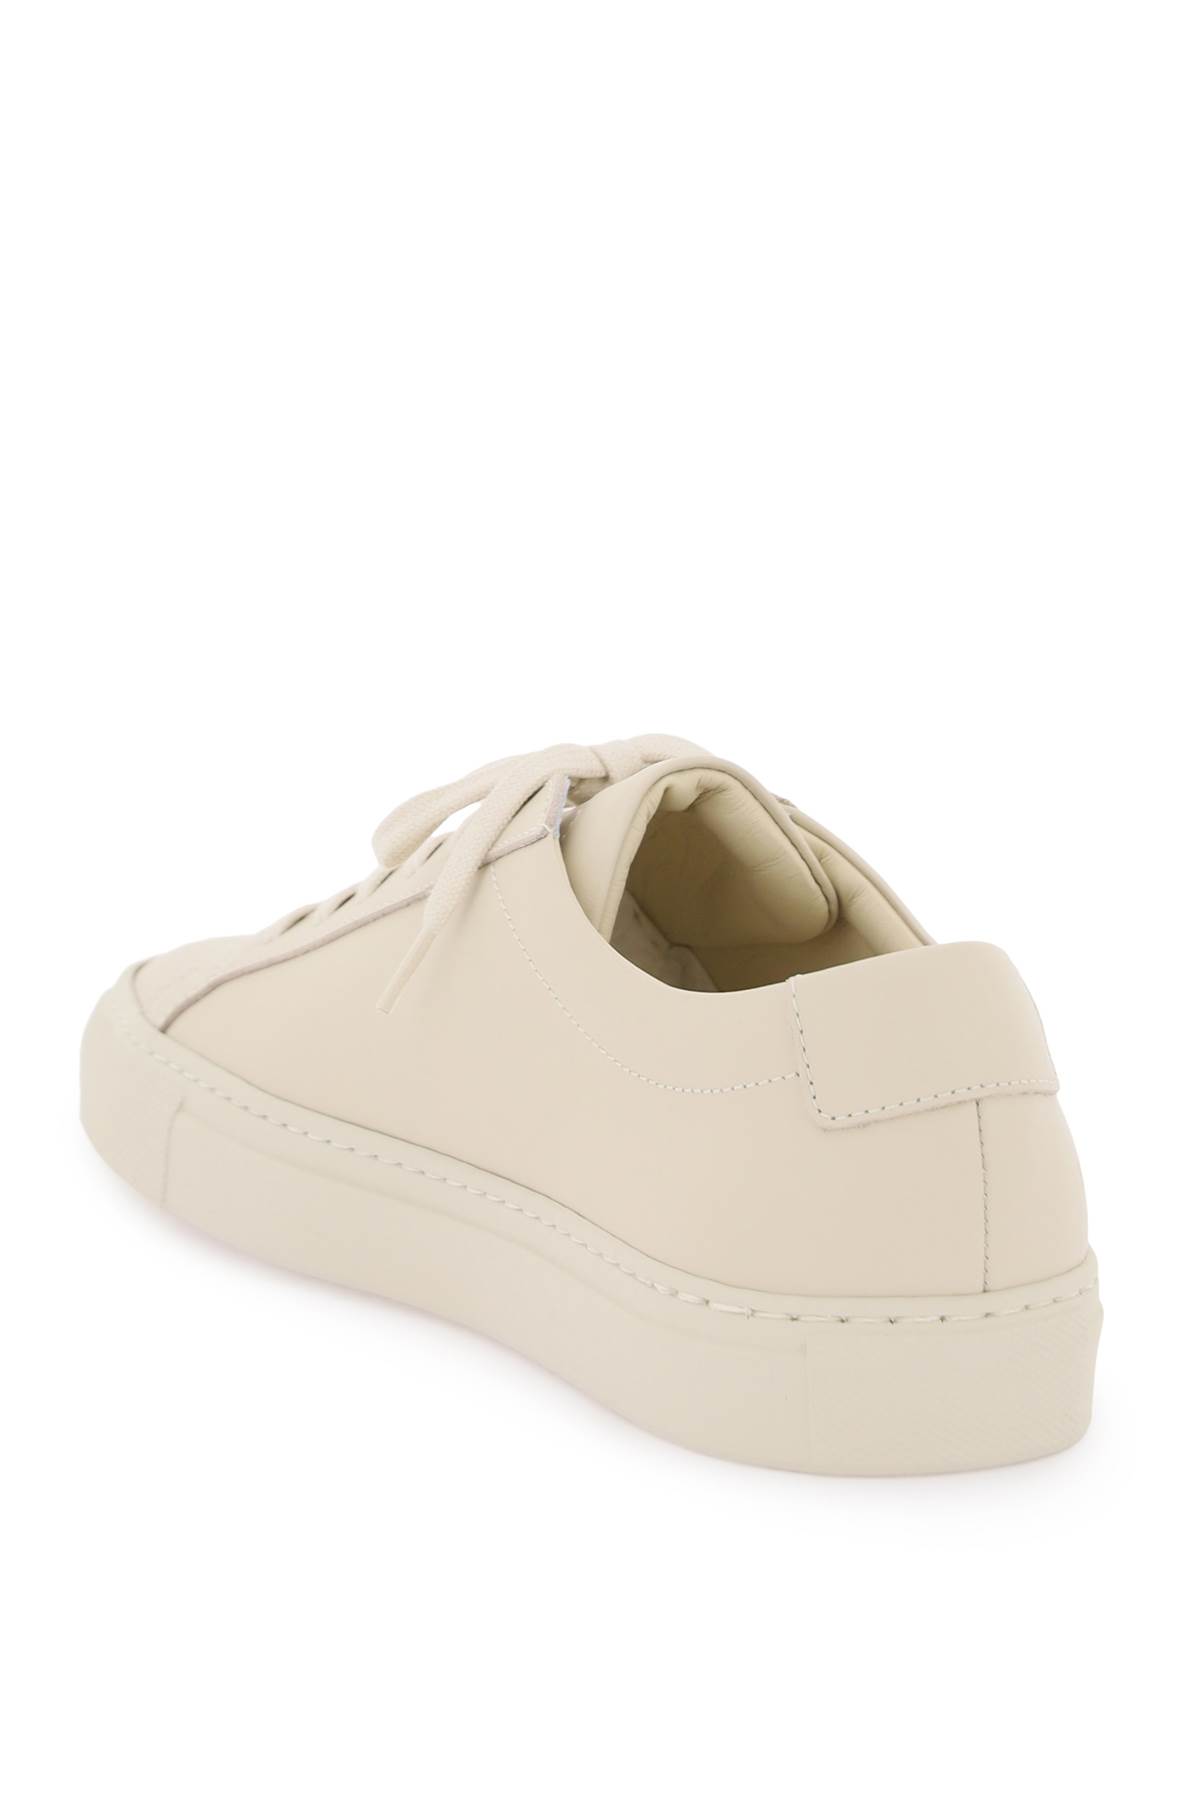 Shop Common Projects Original Achilles Leather Sneakers In Ecru